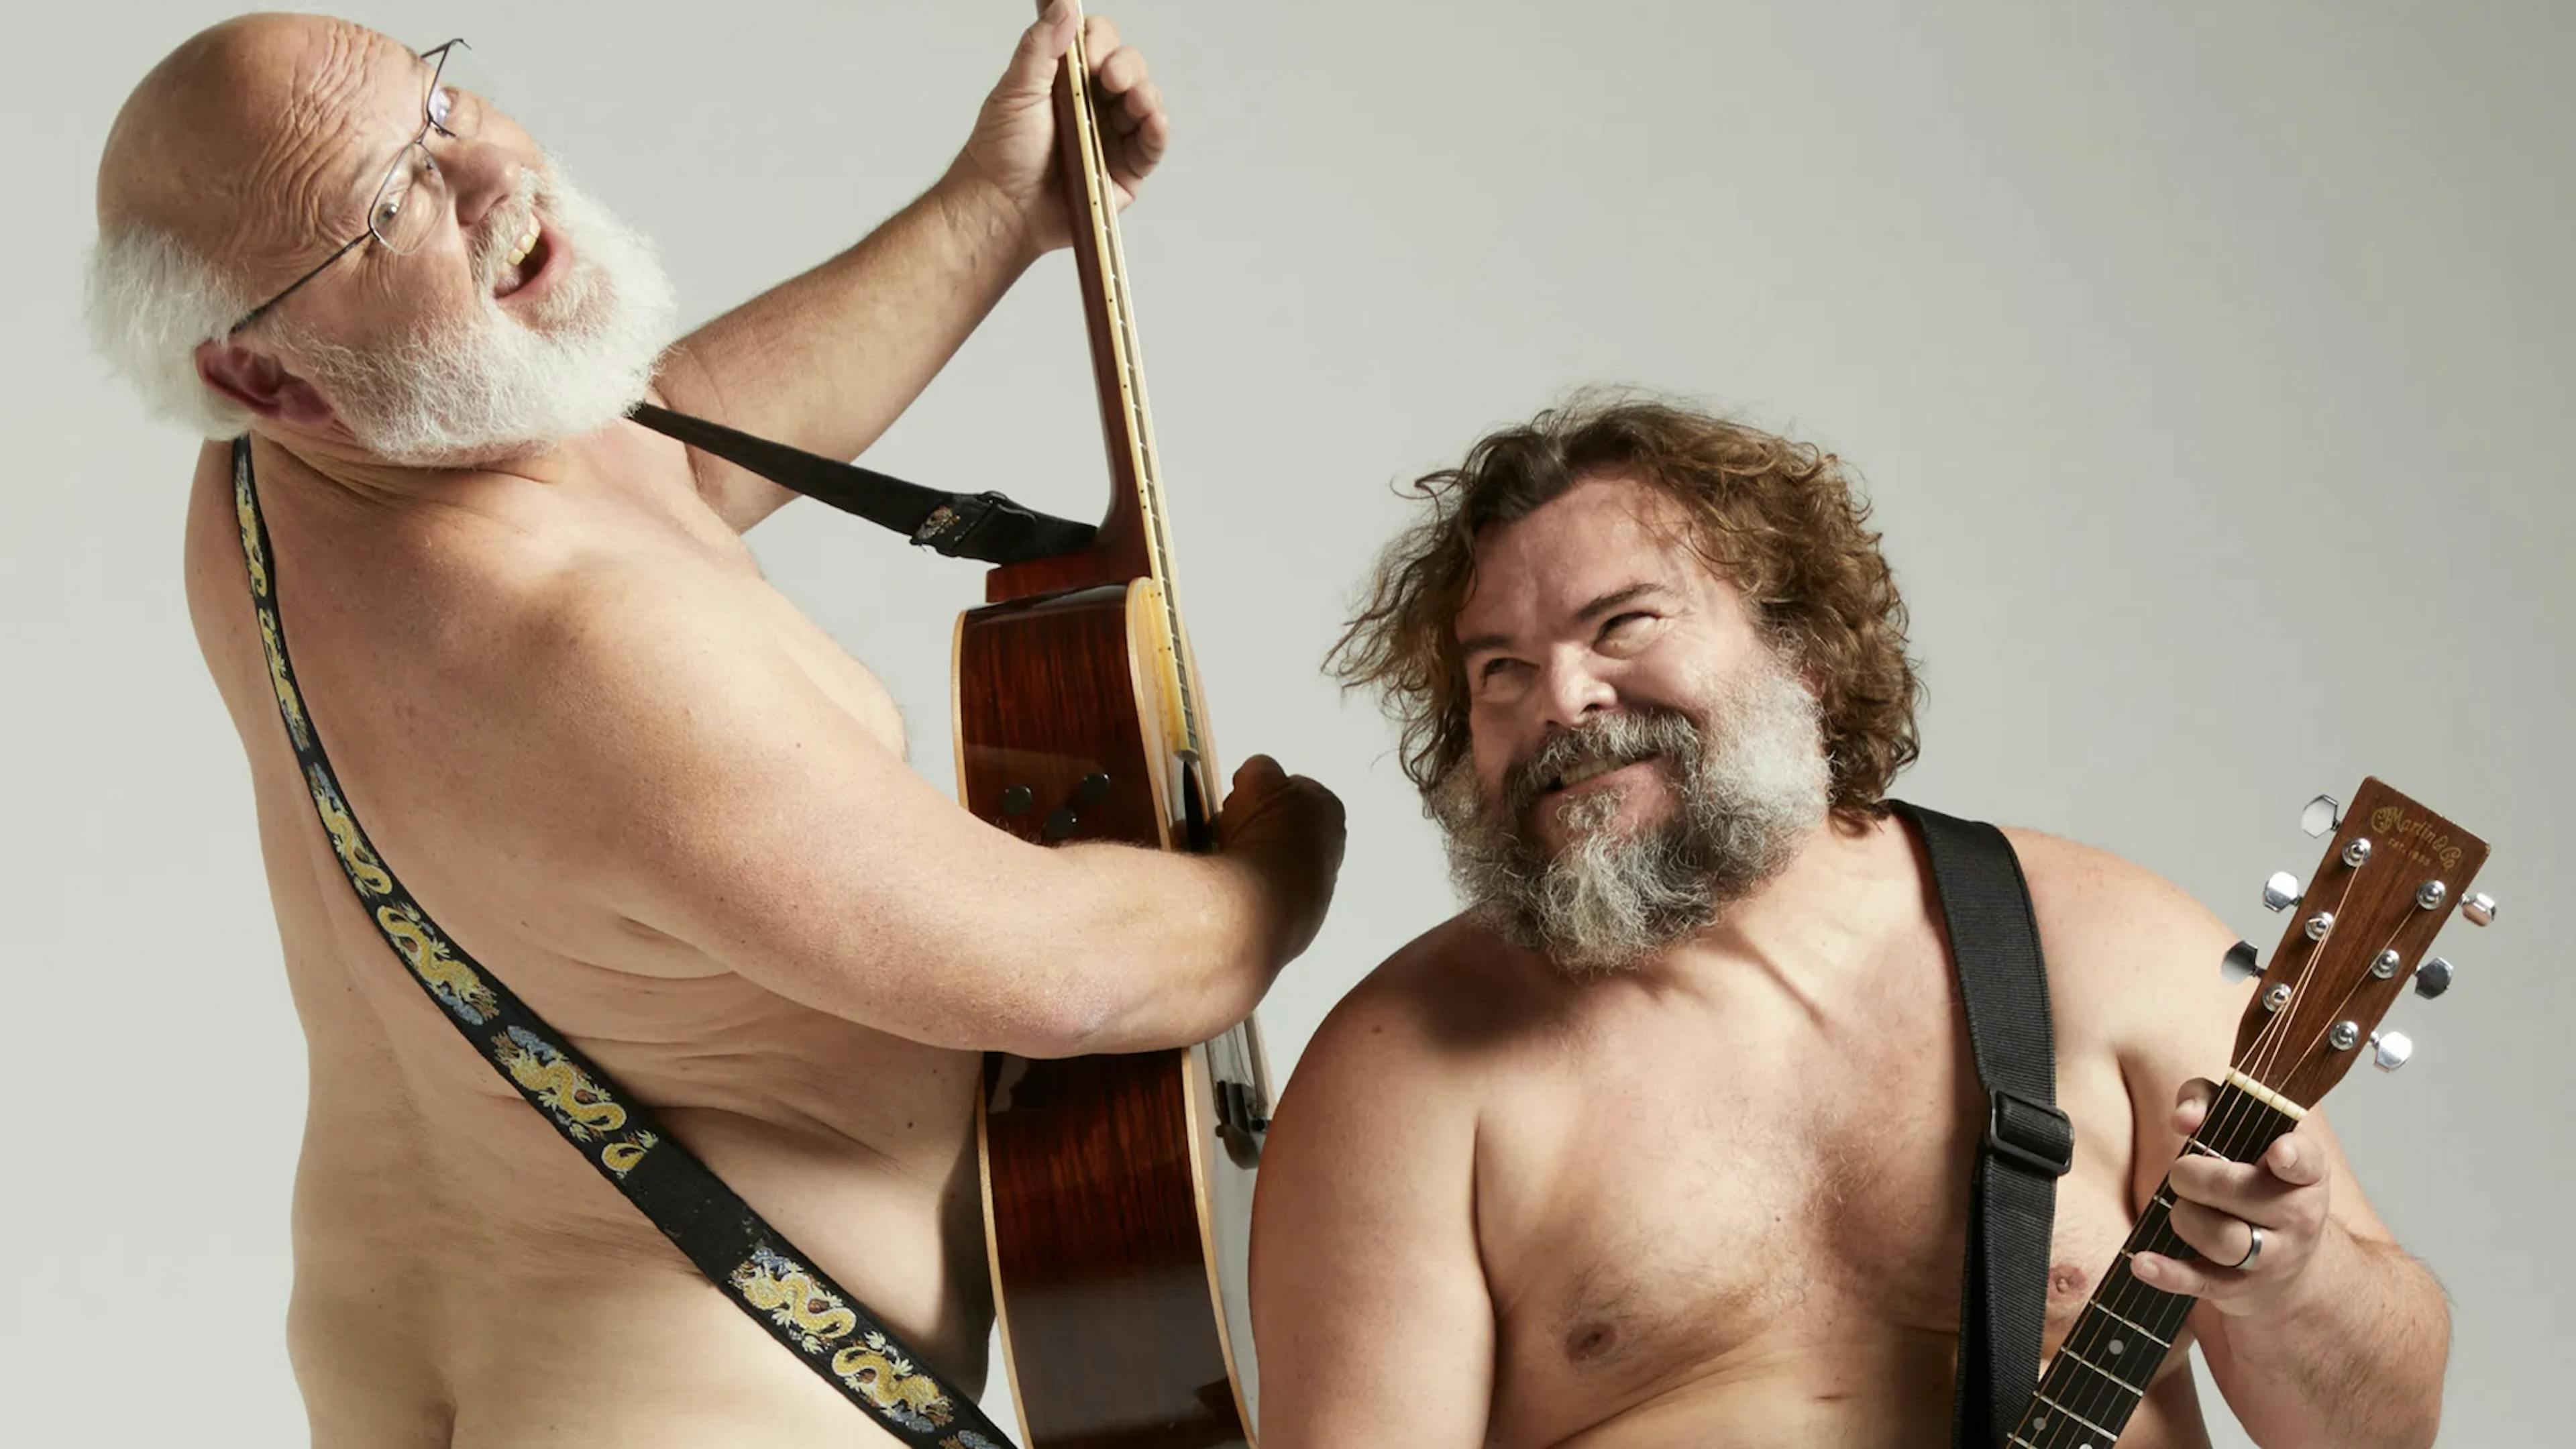 Tenacious D are working on a new album: “We gotta do it this year”